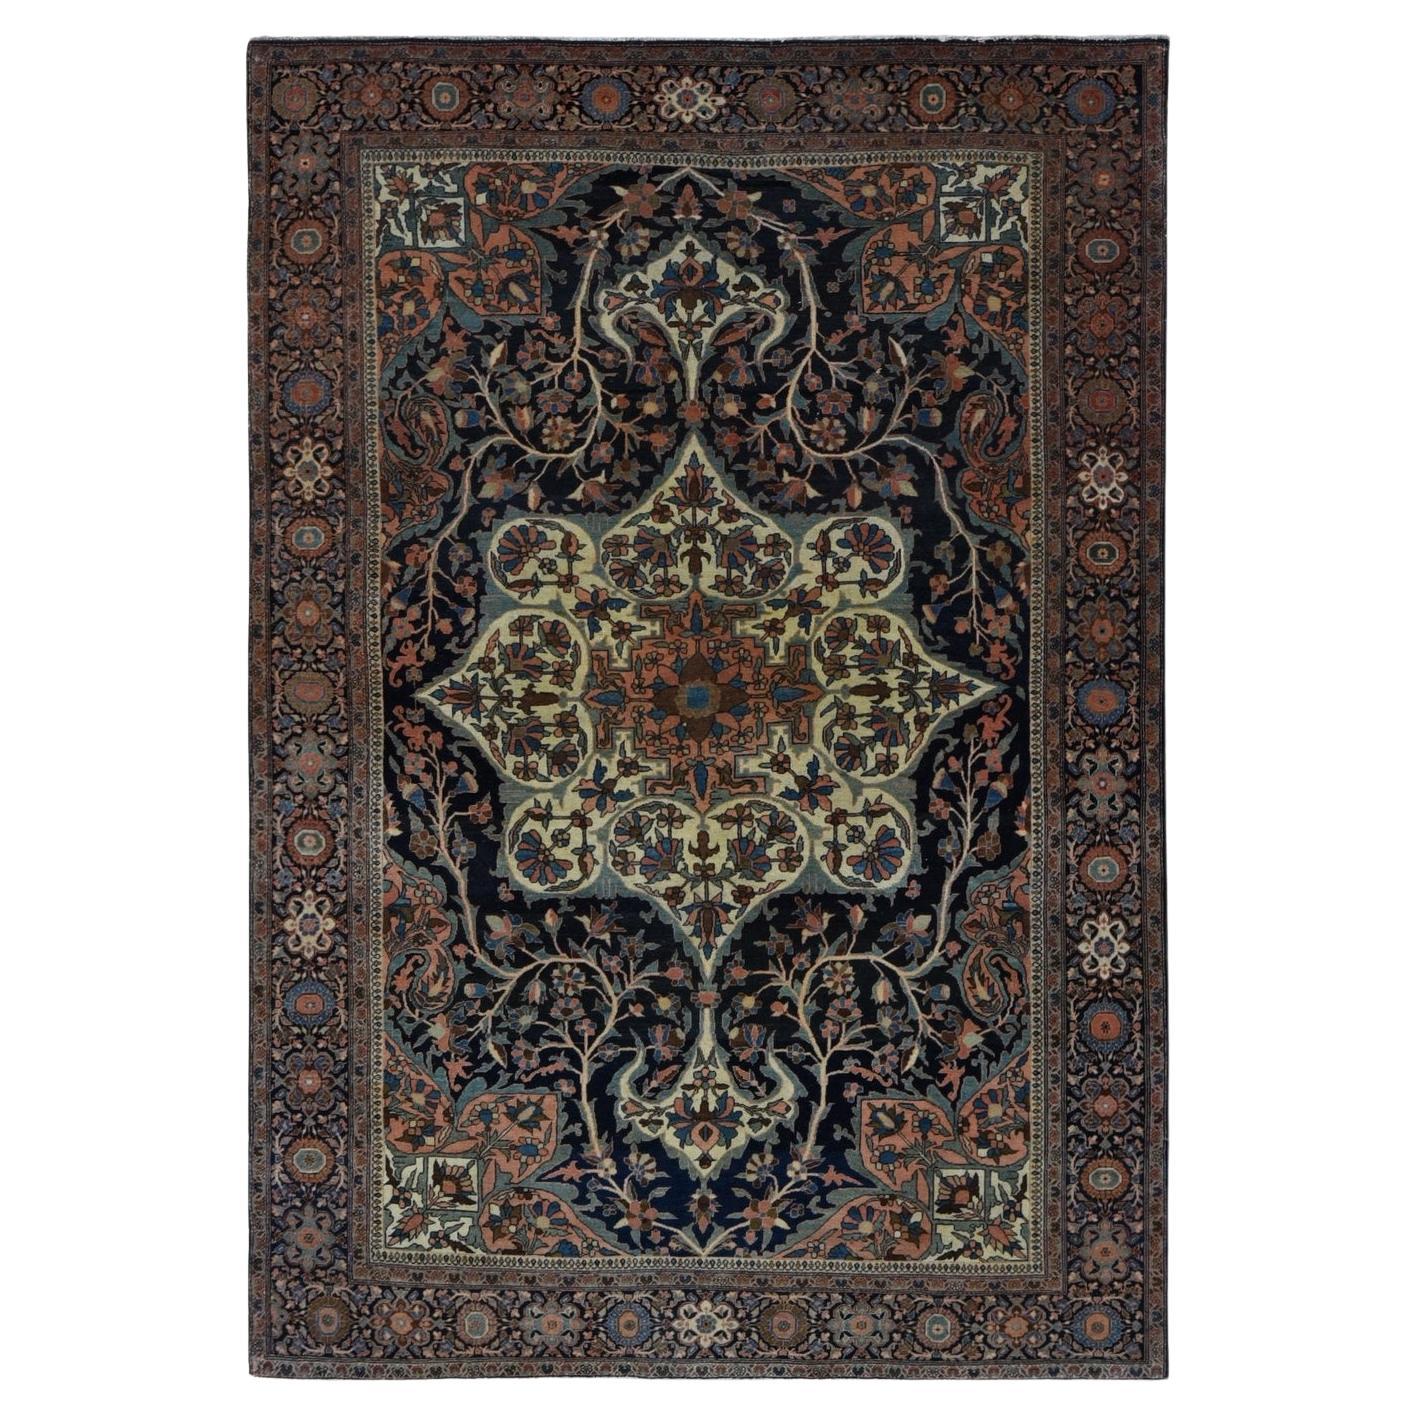 Brown Antique Persian Fereghan Sarouk Clean Soft Even Wear Wool Hand Knotted Rug For Sale